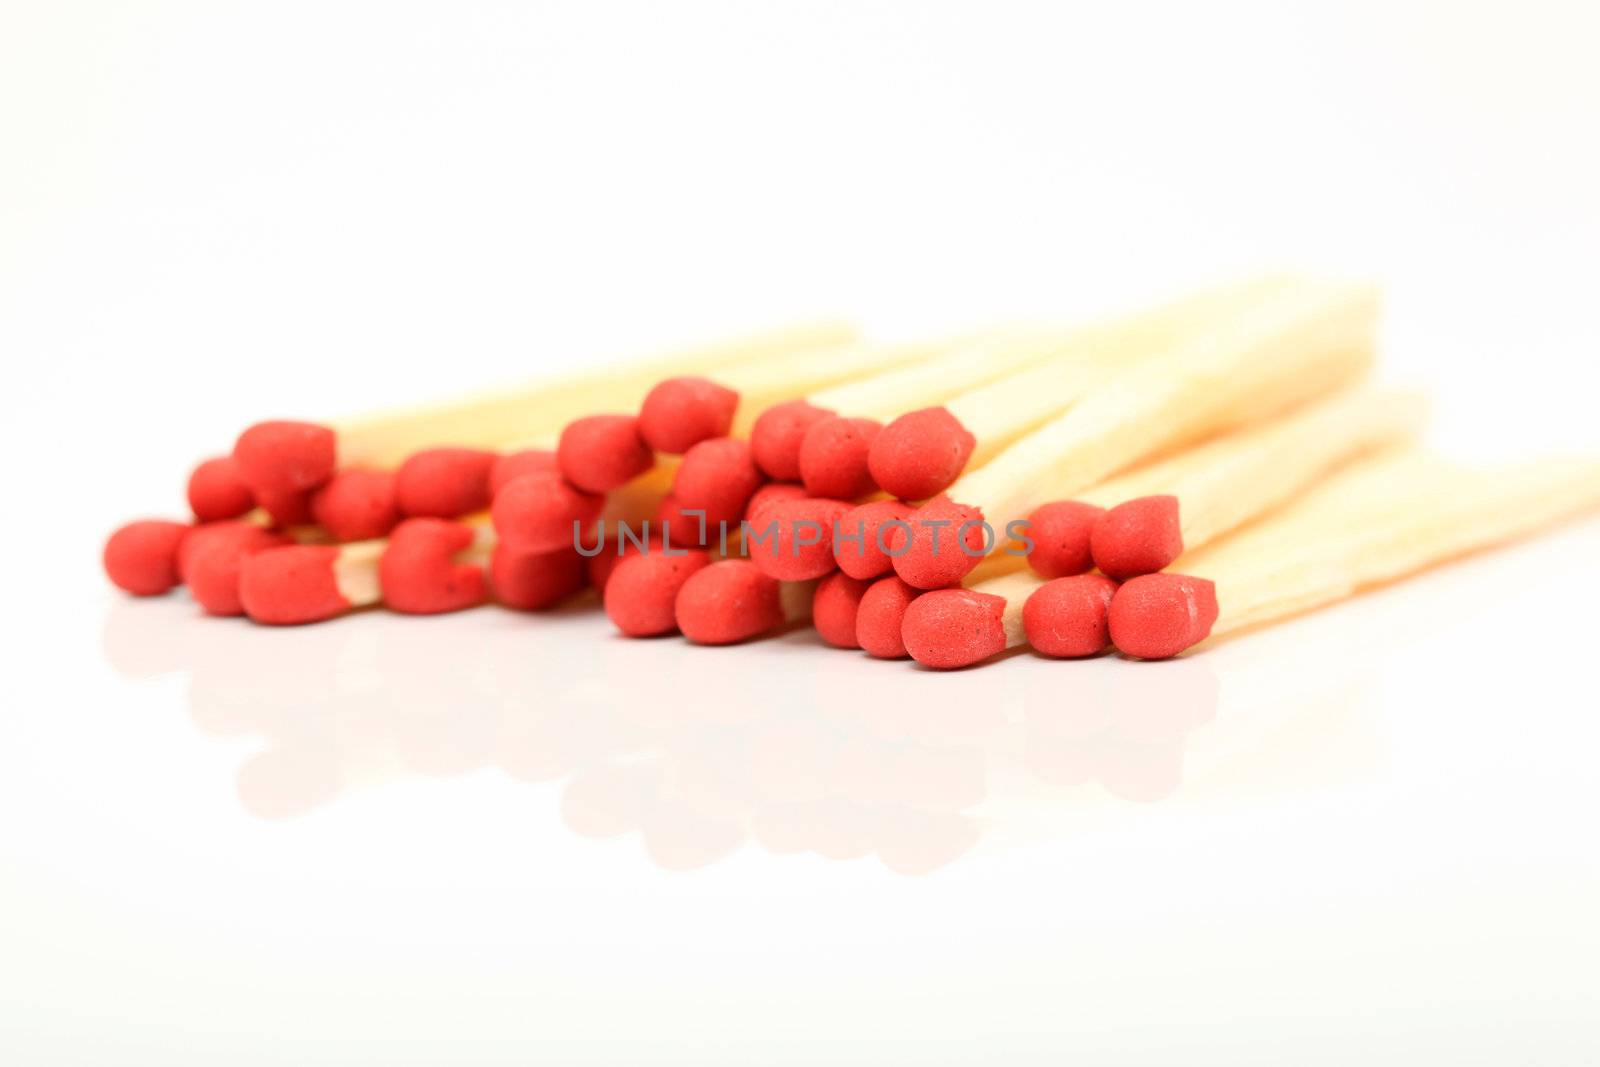 stack of wooden matches sticks closeup detail with reflection isolated